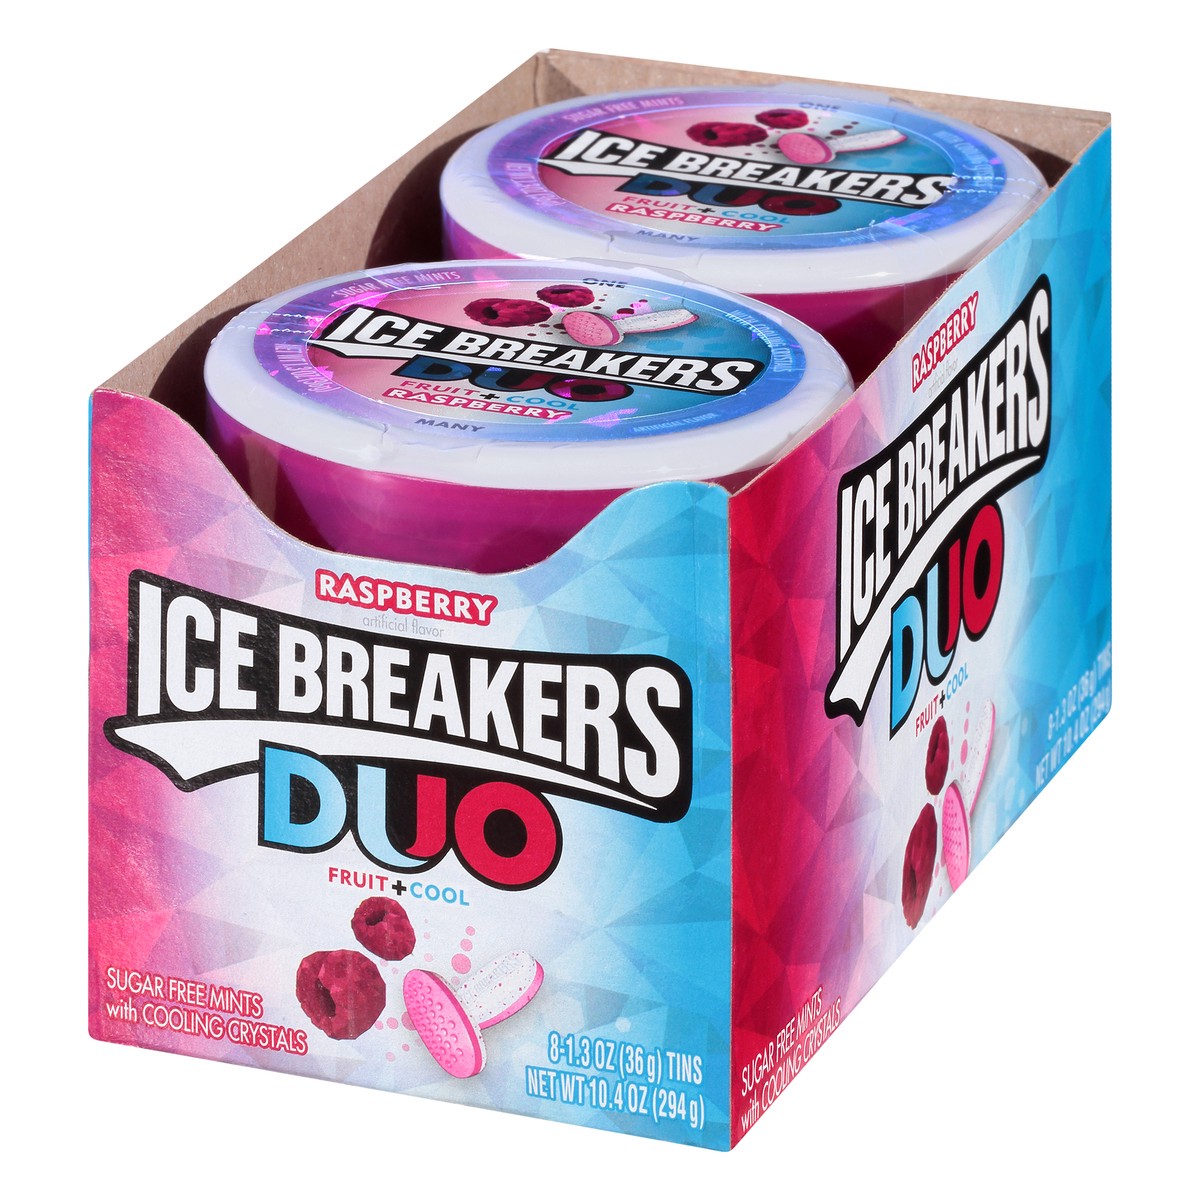 slide 9 of 10, Ice Breakers Duo Sugar Free Fruit + Cool Fruit+ Cool Raspberry Mints with Flavor Crystals 8 - 1.3 oz Tins, 1.3 oz